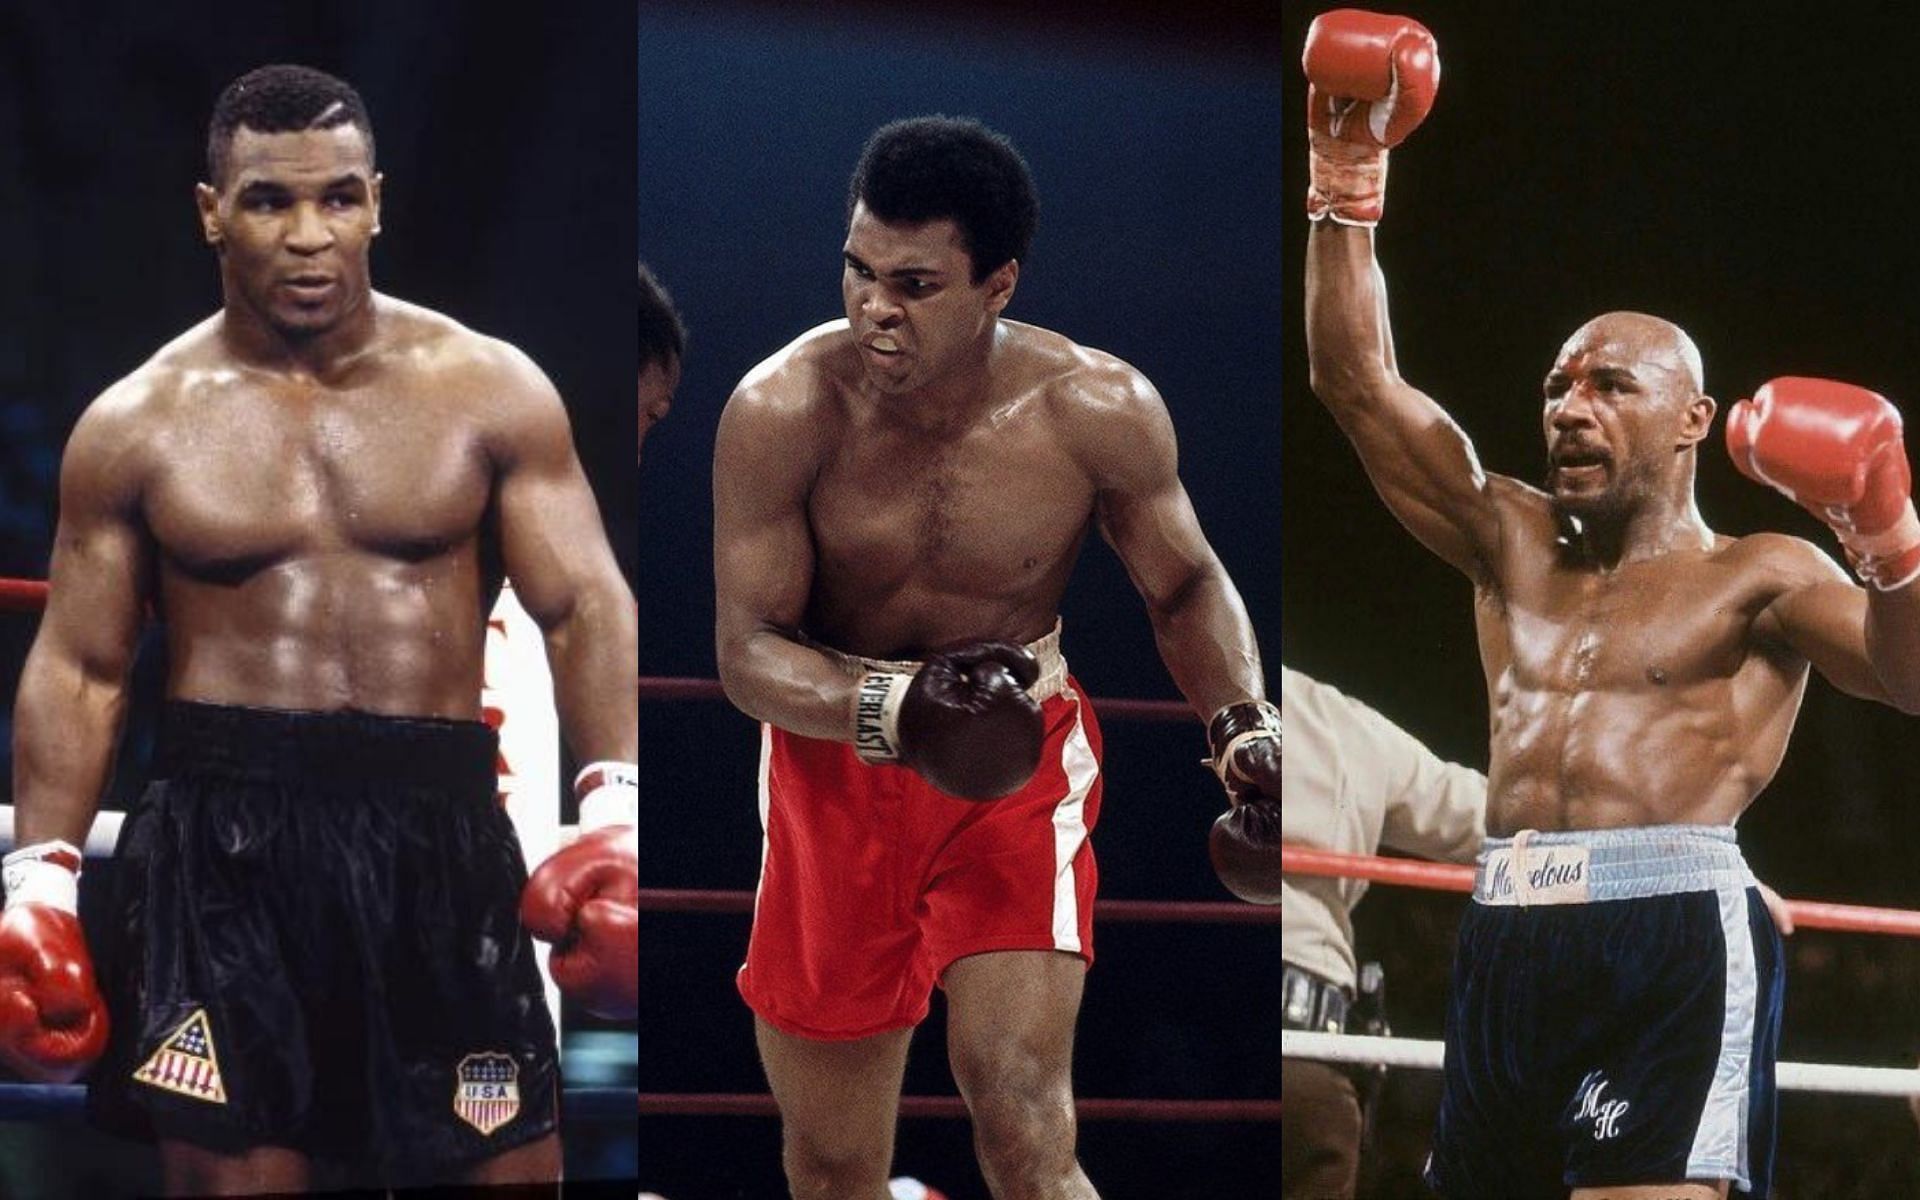 Mike Tyson (left), Muhammad Ali (center) and Marvin Hagler (right) are widely regarded as three of the most influential boxers of all time [Photo Courtesy: Getty Images and @muhammadali and @realmarvinhagler on Instagram]